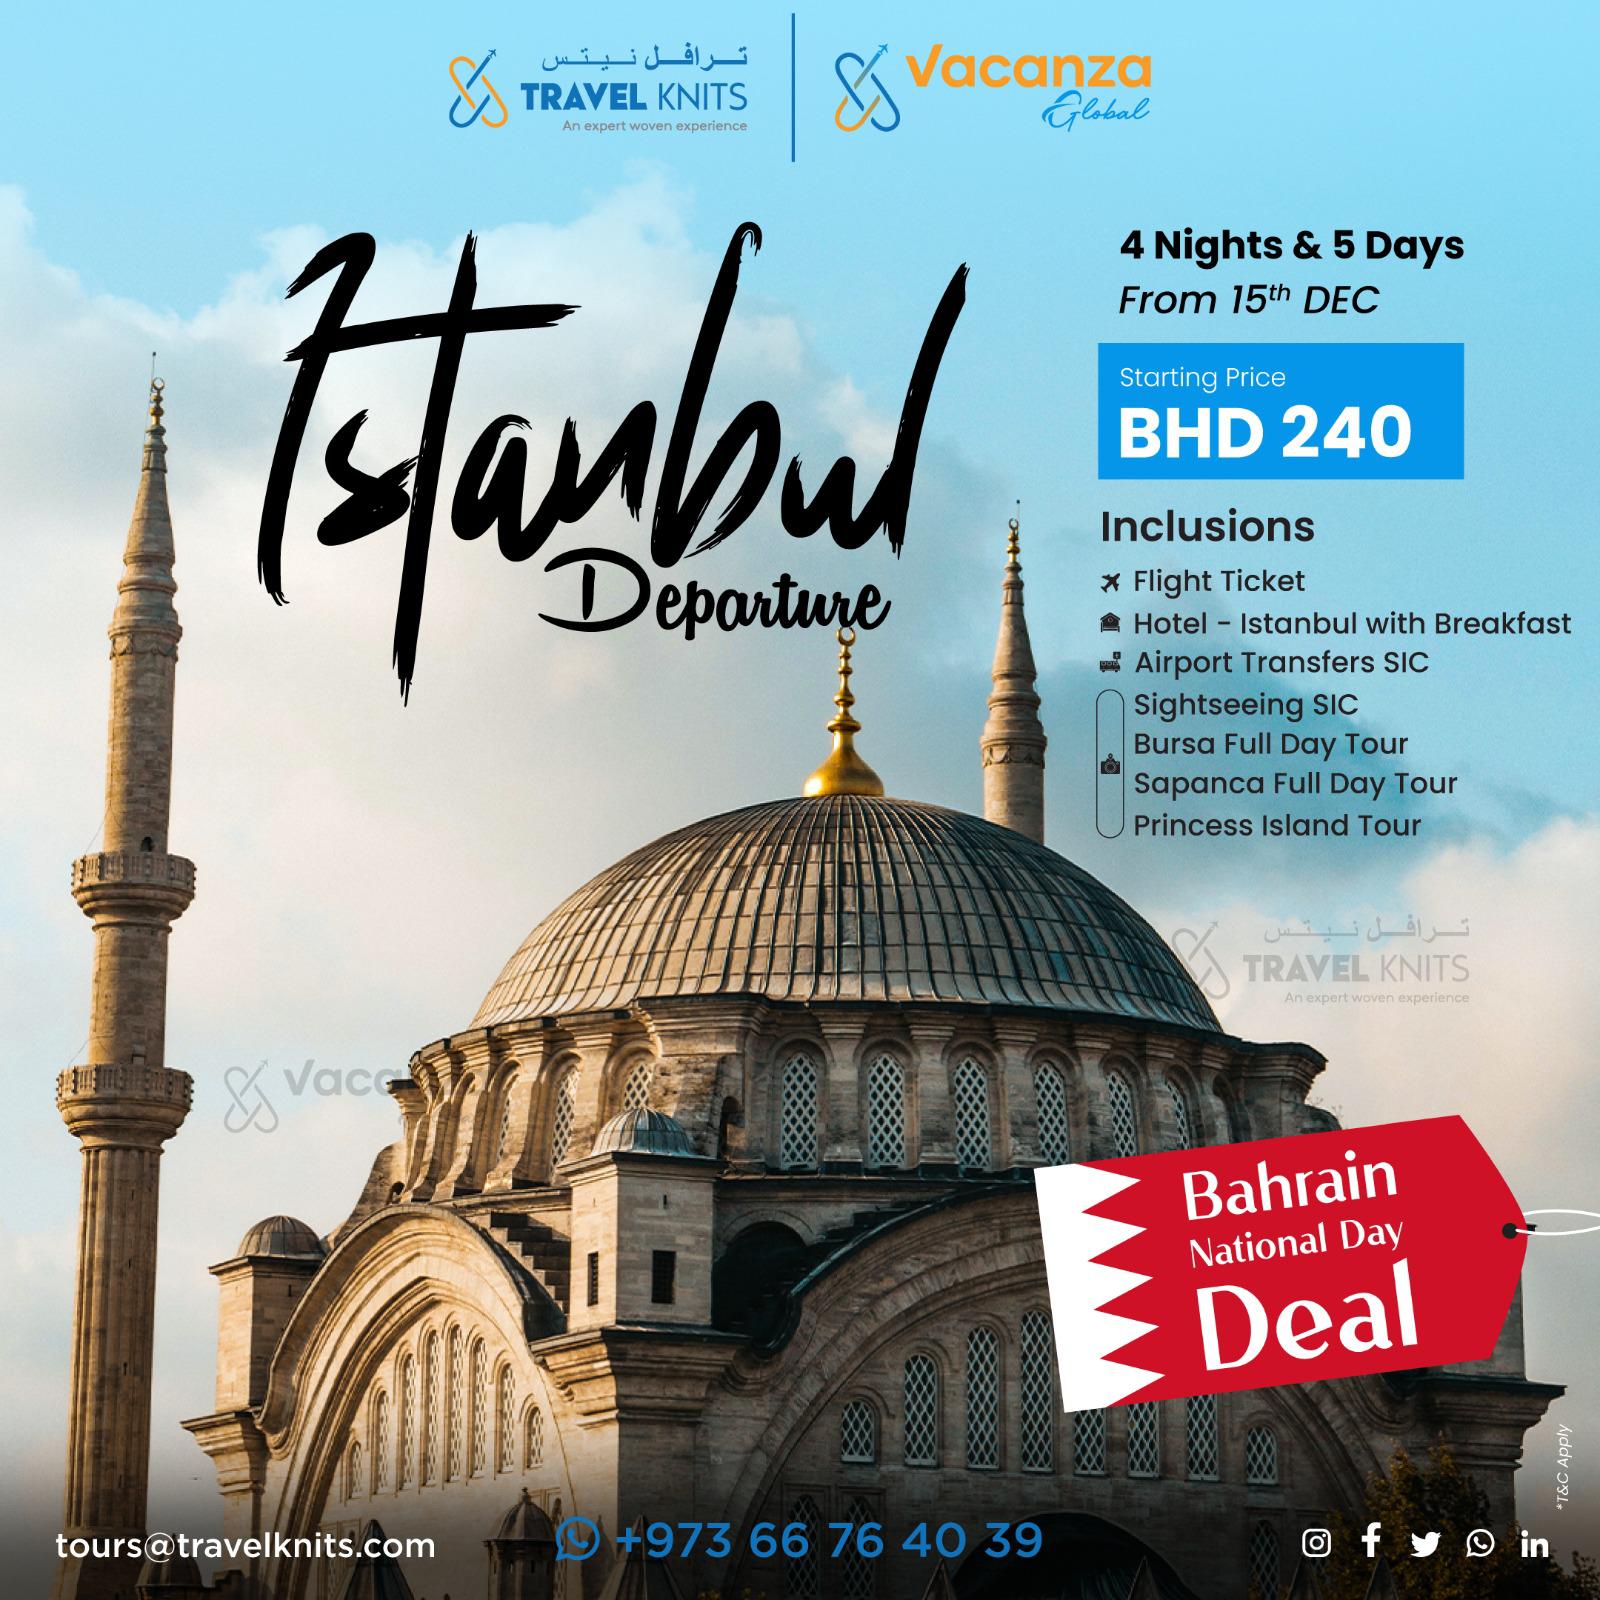 ISTANBUL BAHRAIN NATIONAL DAY|TurkeyTour Packages - Book honeymoon ,family,adventure tour packages to Turkey|Travel Knits												